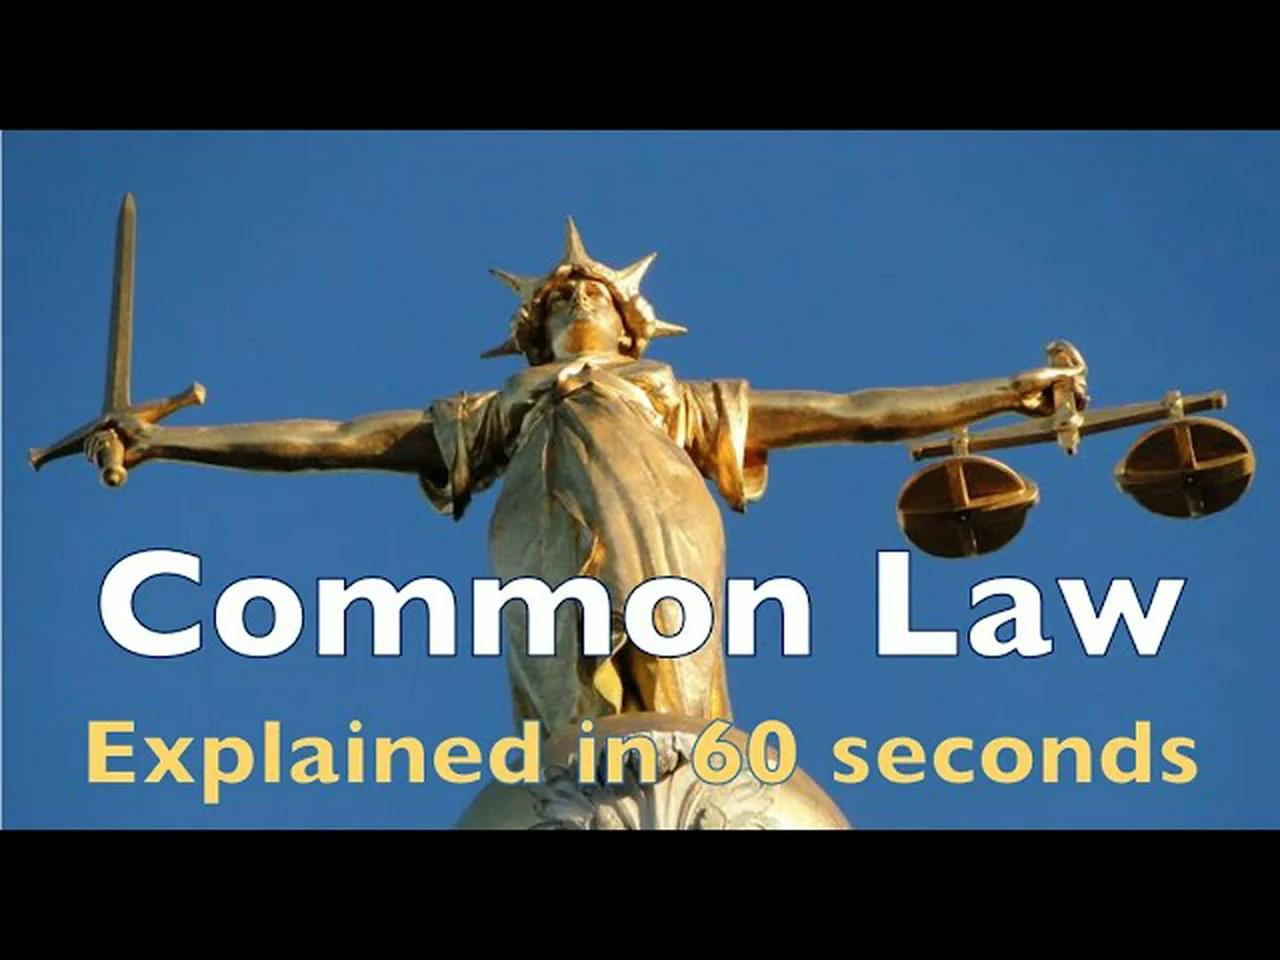 Common Law Explained in 60 seconds